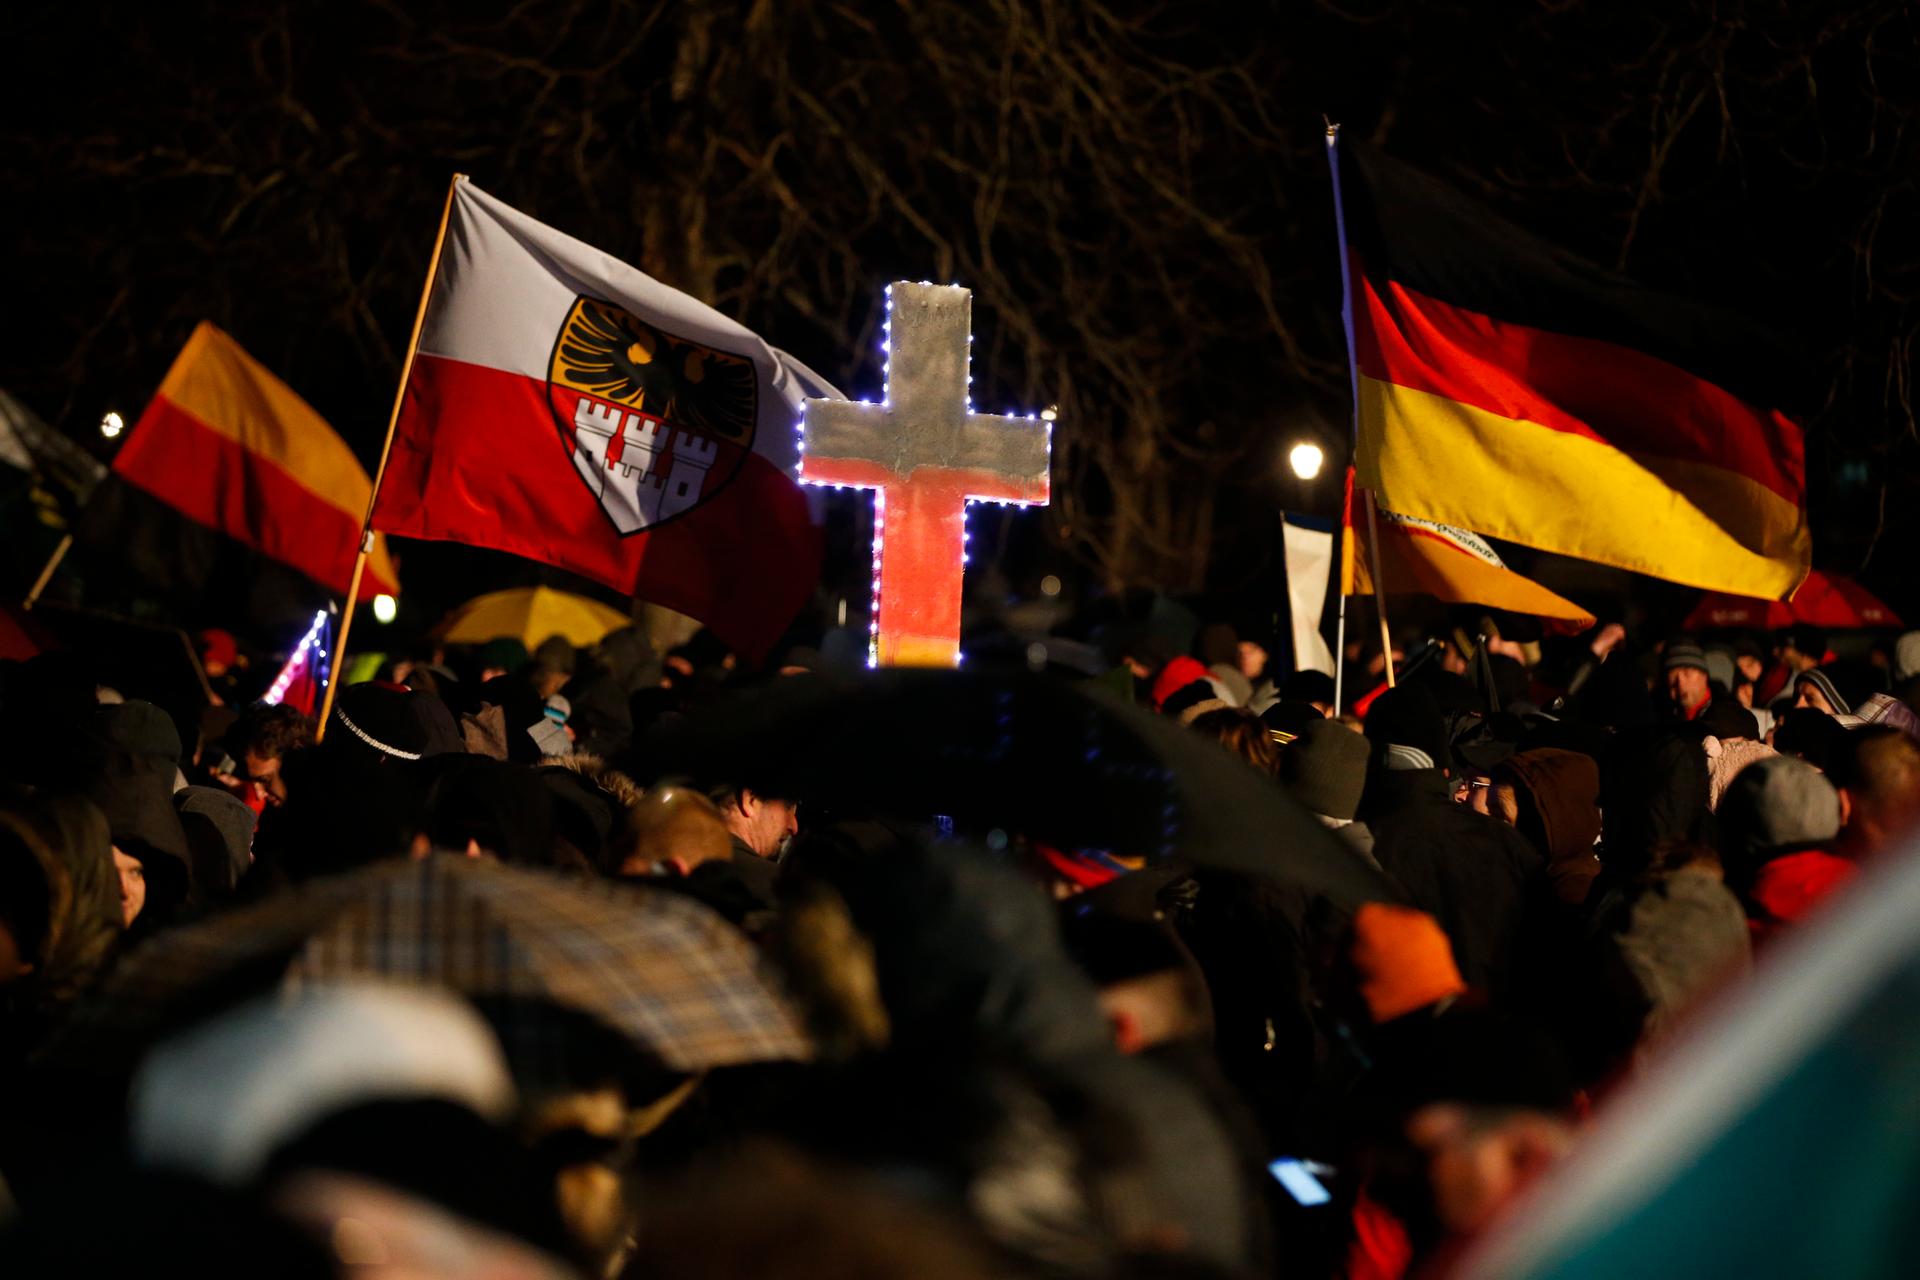 Participants take part in a demonstration called by anti-immigration group PEGIDA, a German abbreviation for "Patriotic Europeans against the Islamization of the West", in Dresden January 5, 2015. 